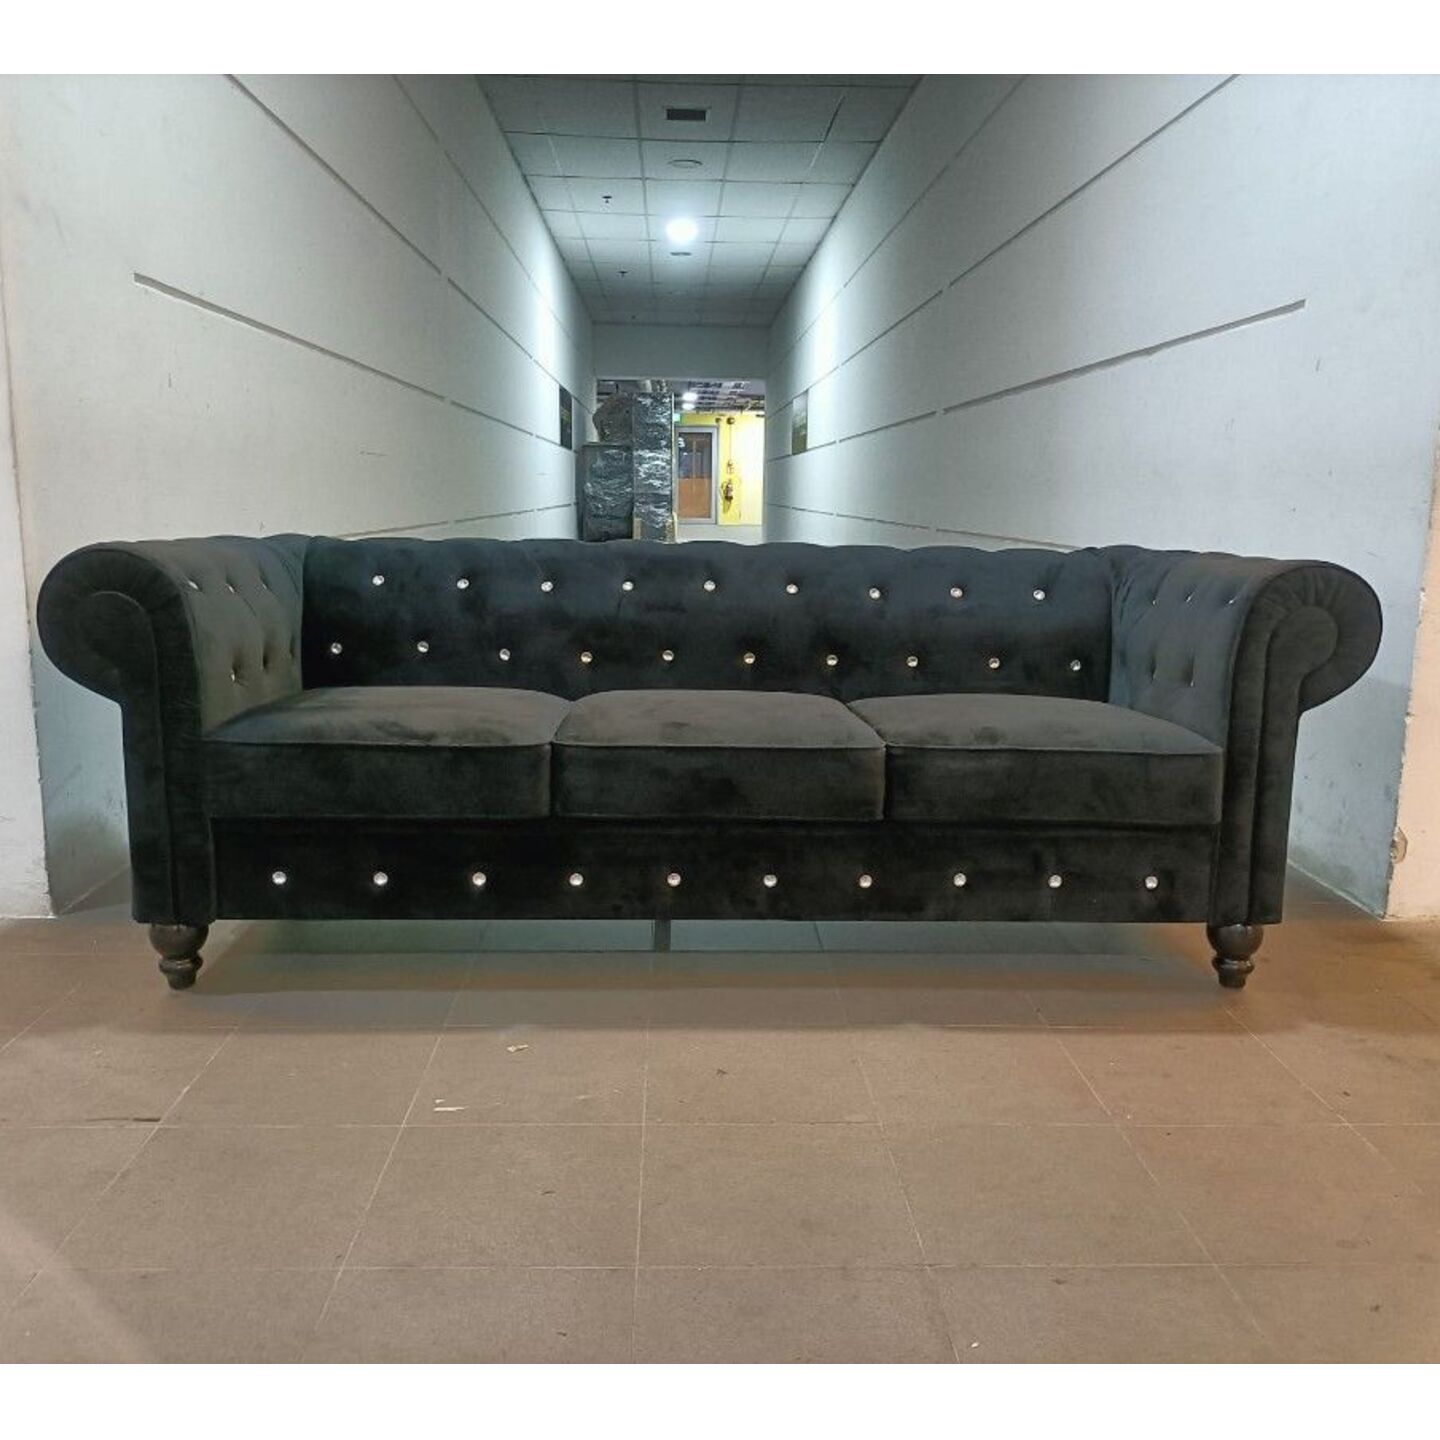 REGERA 3 Seater Chesterfield Sofa with Crystal Studs in VELVET BLACK